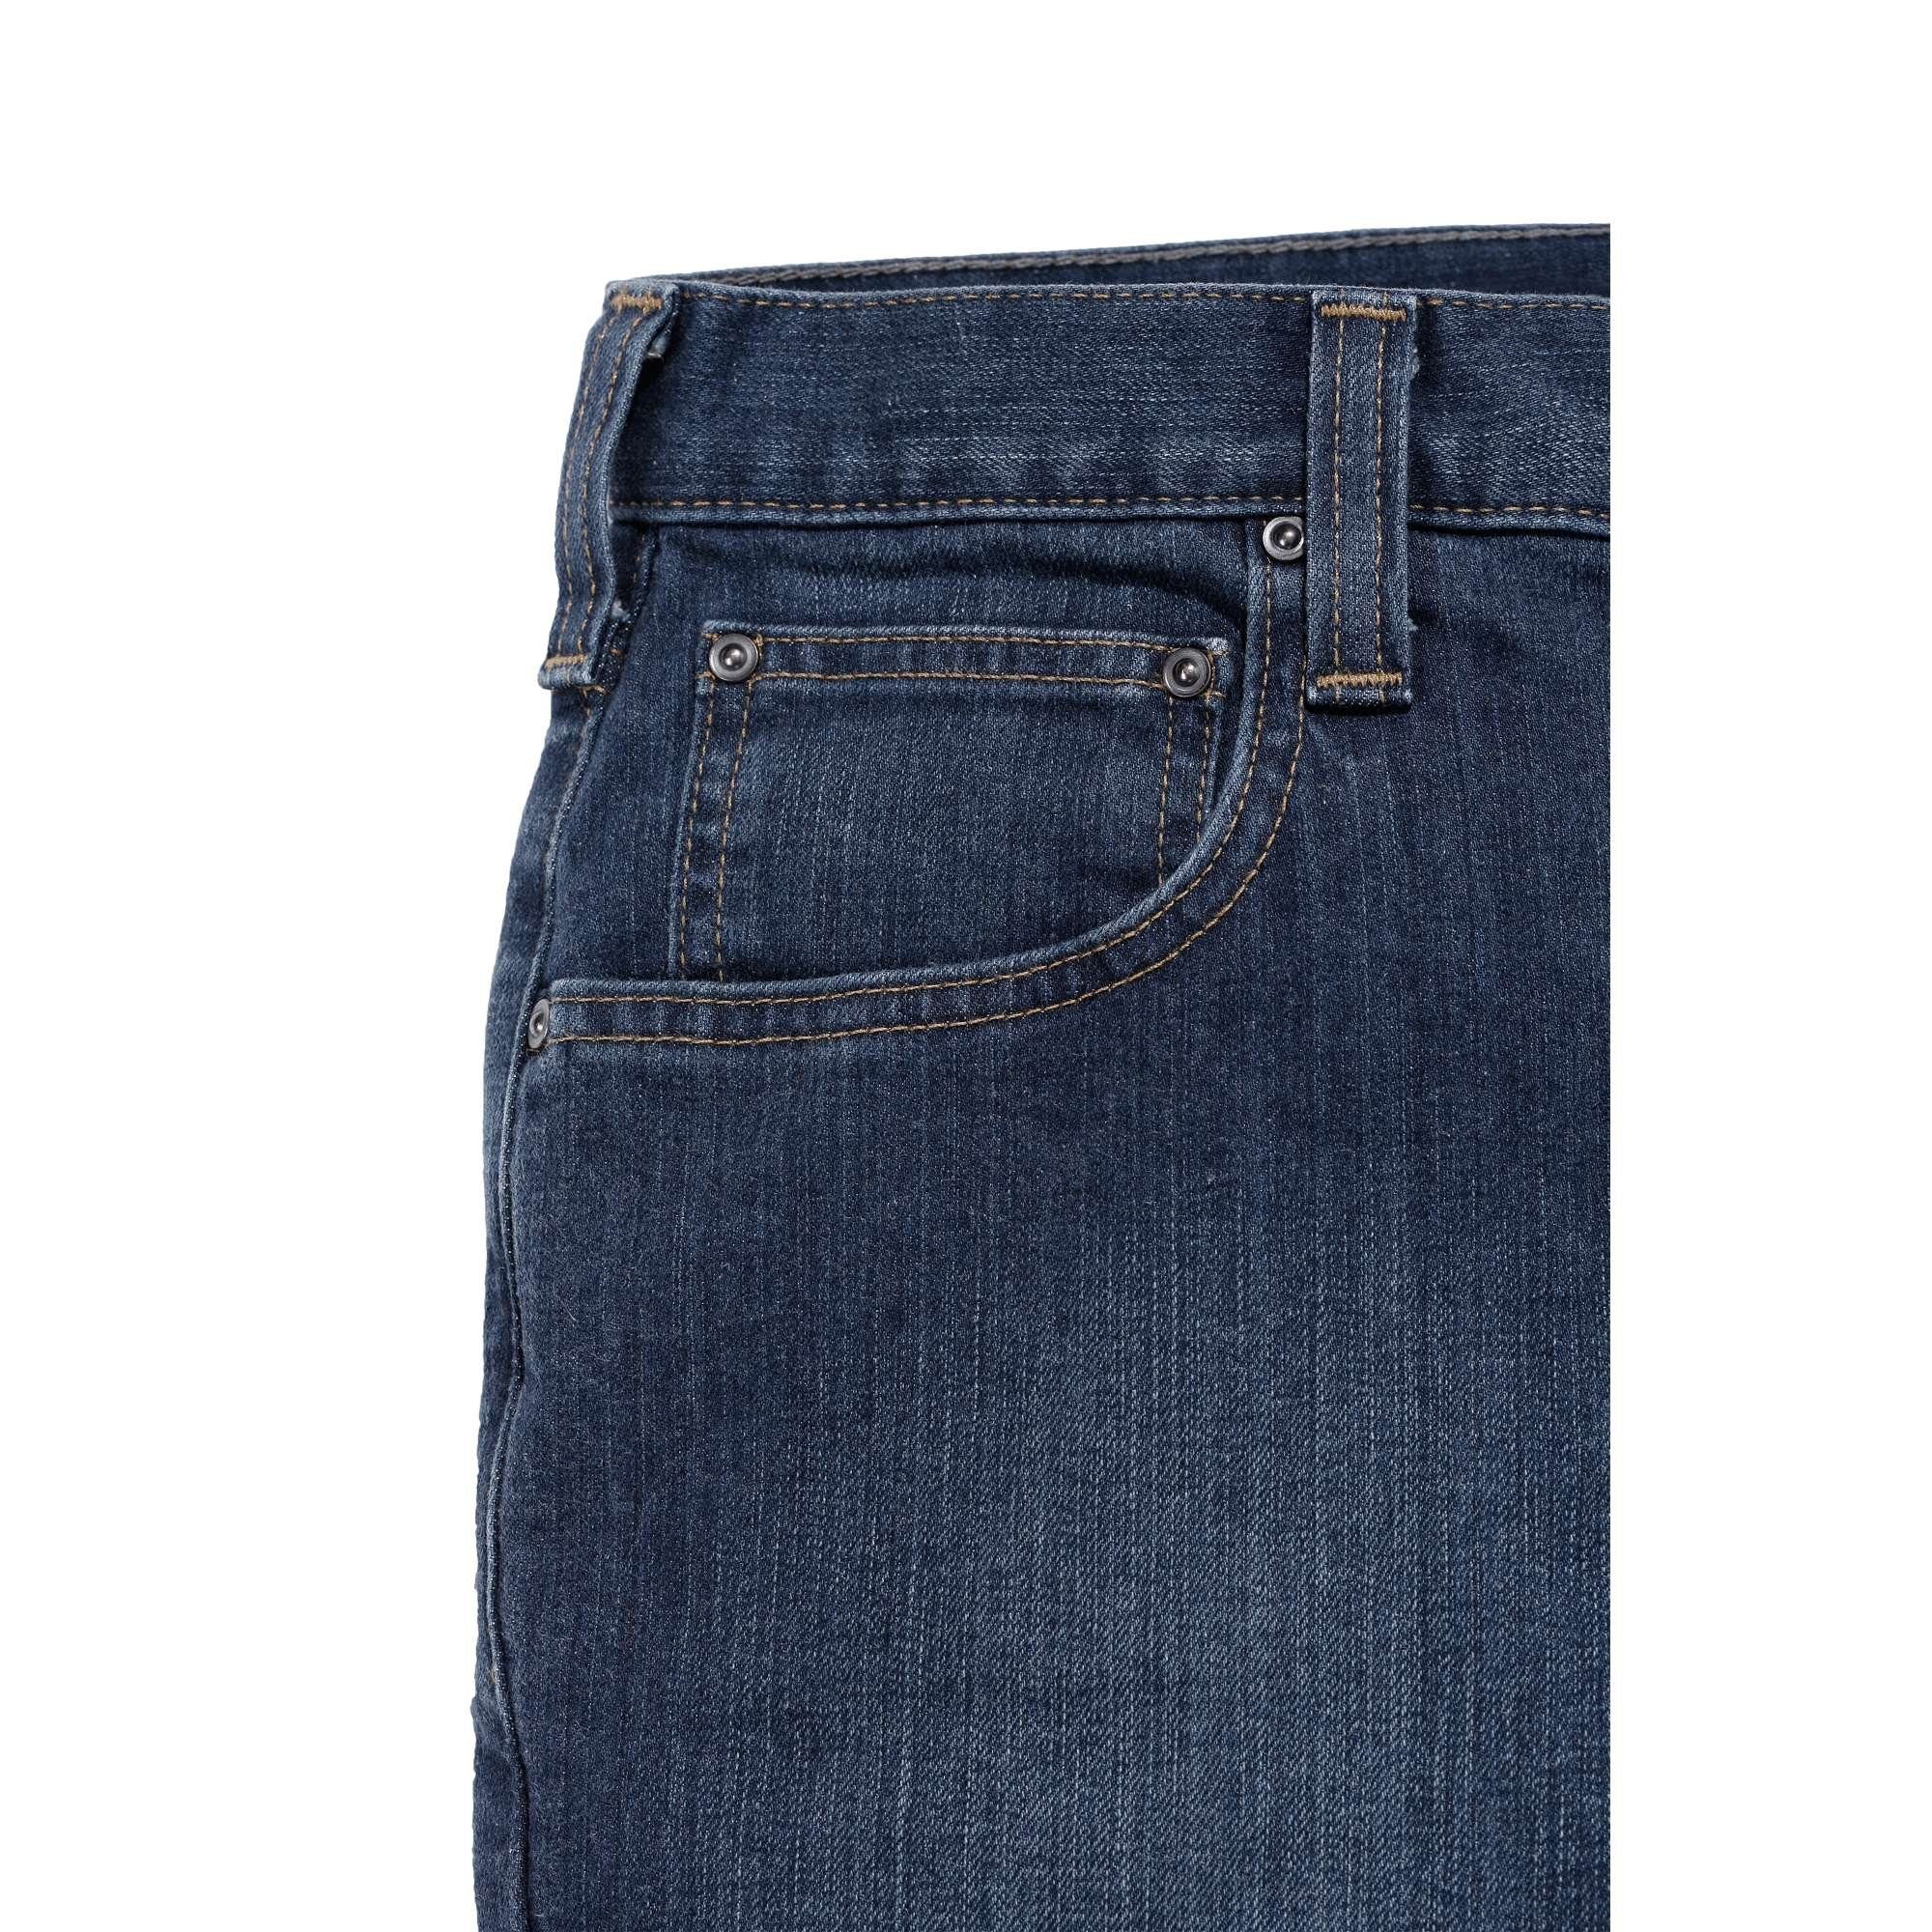 chambray STRAIGHT FLEX (1-tlg) RUGGED Carhartt JEAN Stretch-Jeans RELAXED blue light